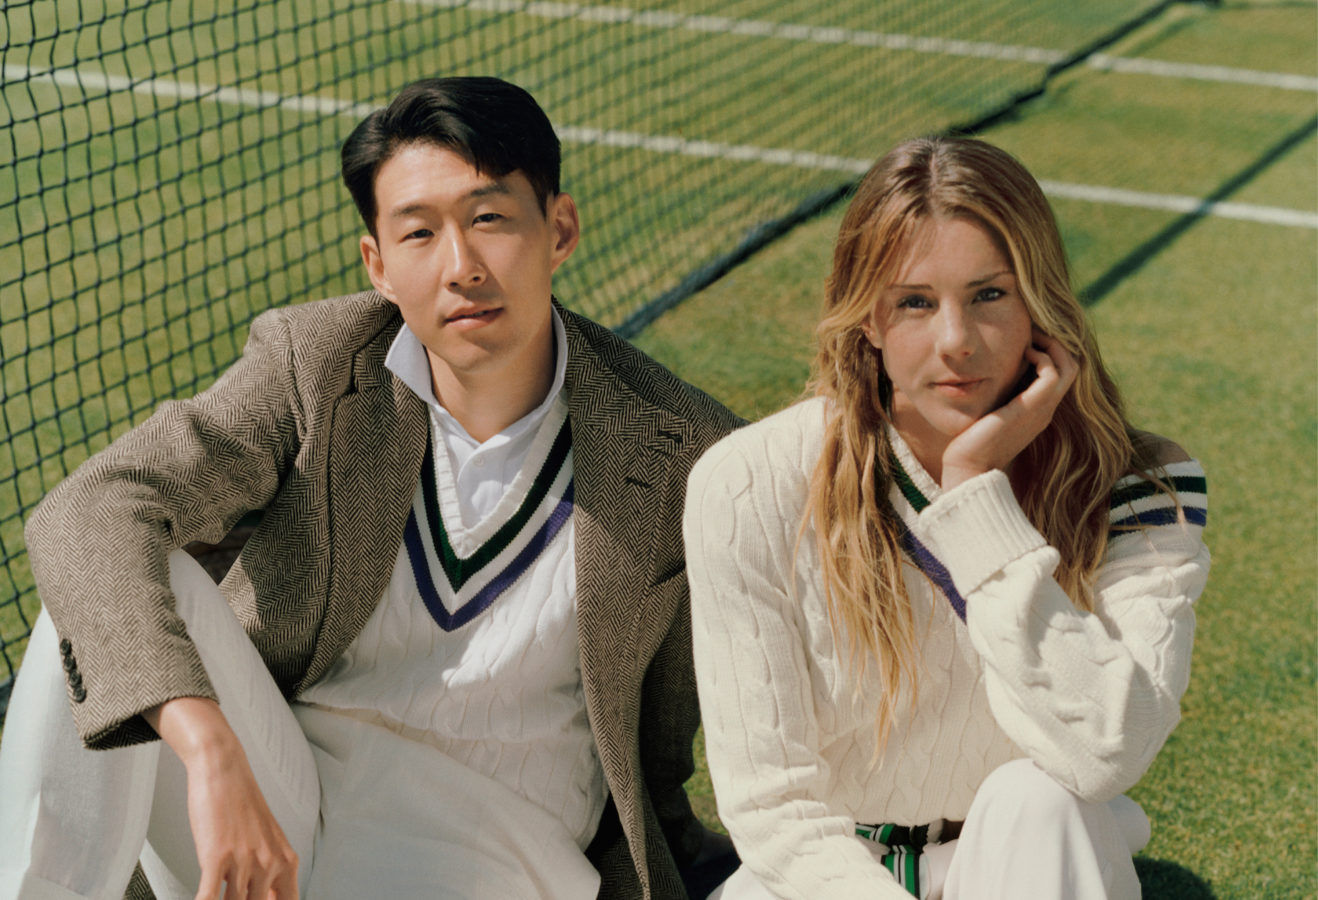 Ralph Lauren Celebrates 16 Years as the Official Outfitter of Wimbledon